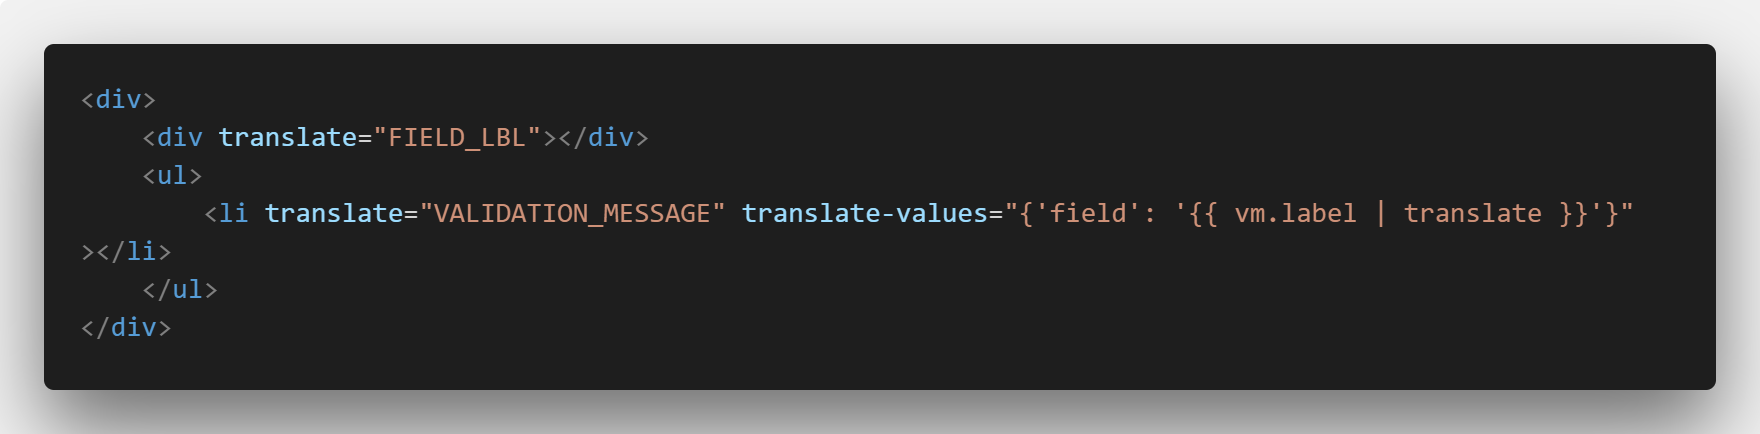 A view that uses angular-translate to plug translated values into another translated string